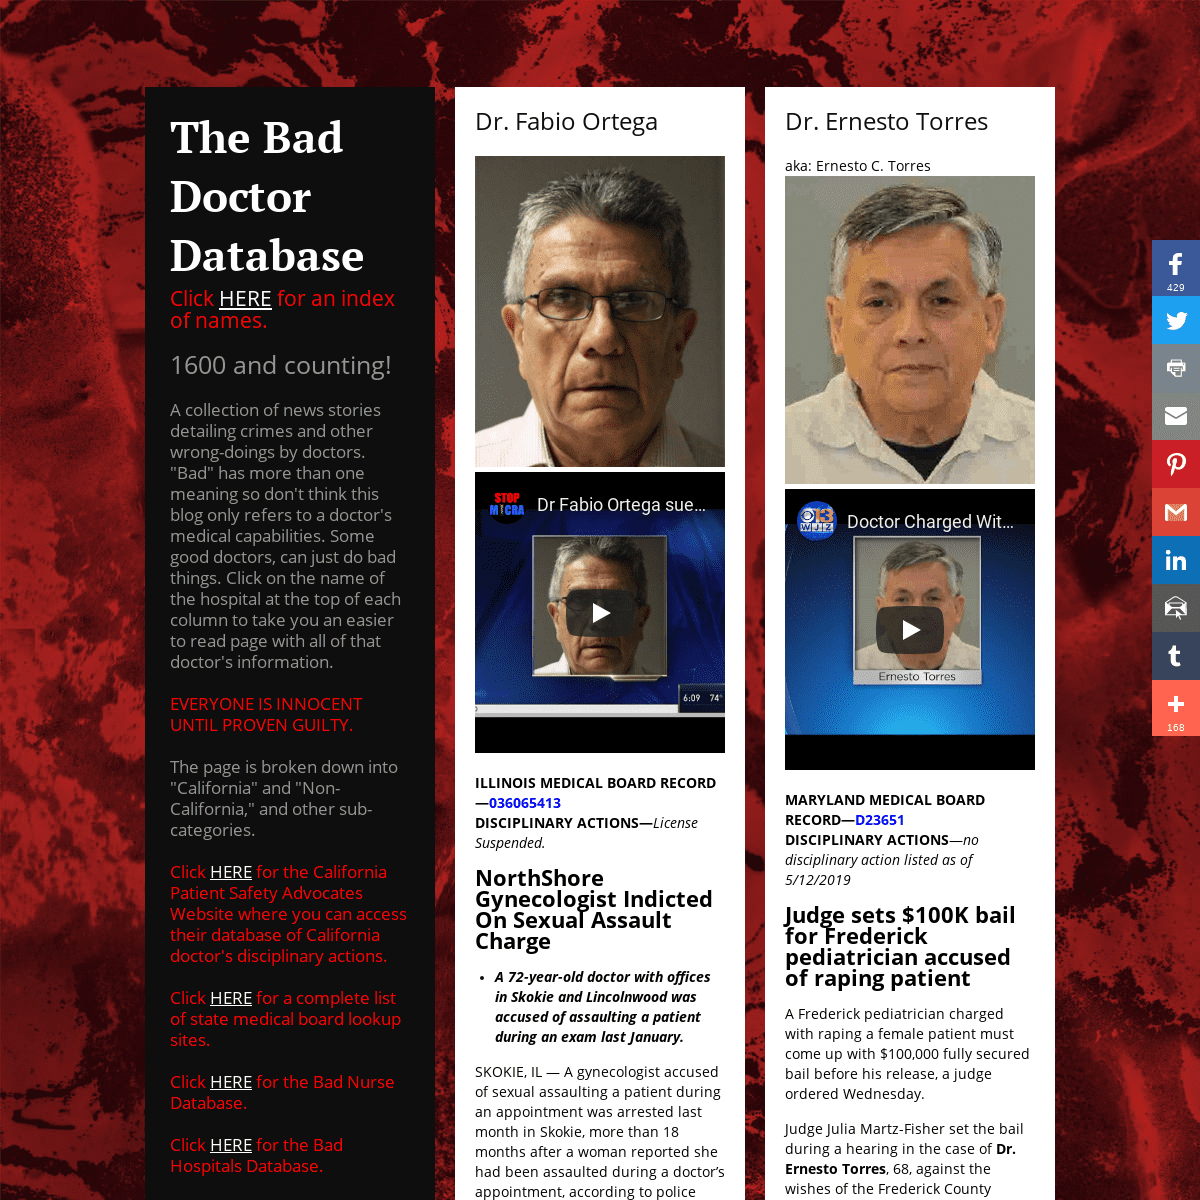 The Bad Doctor Database